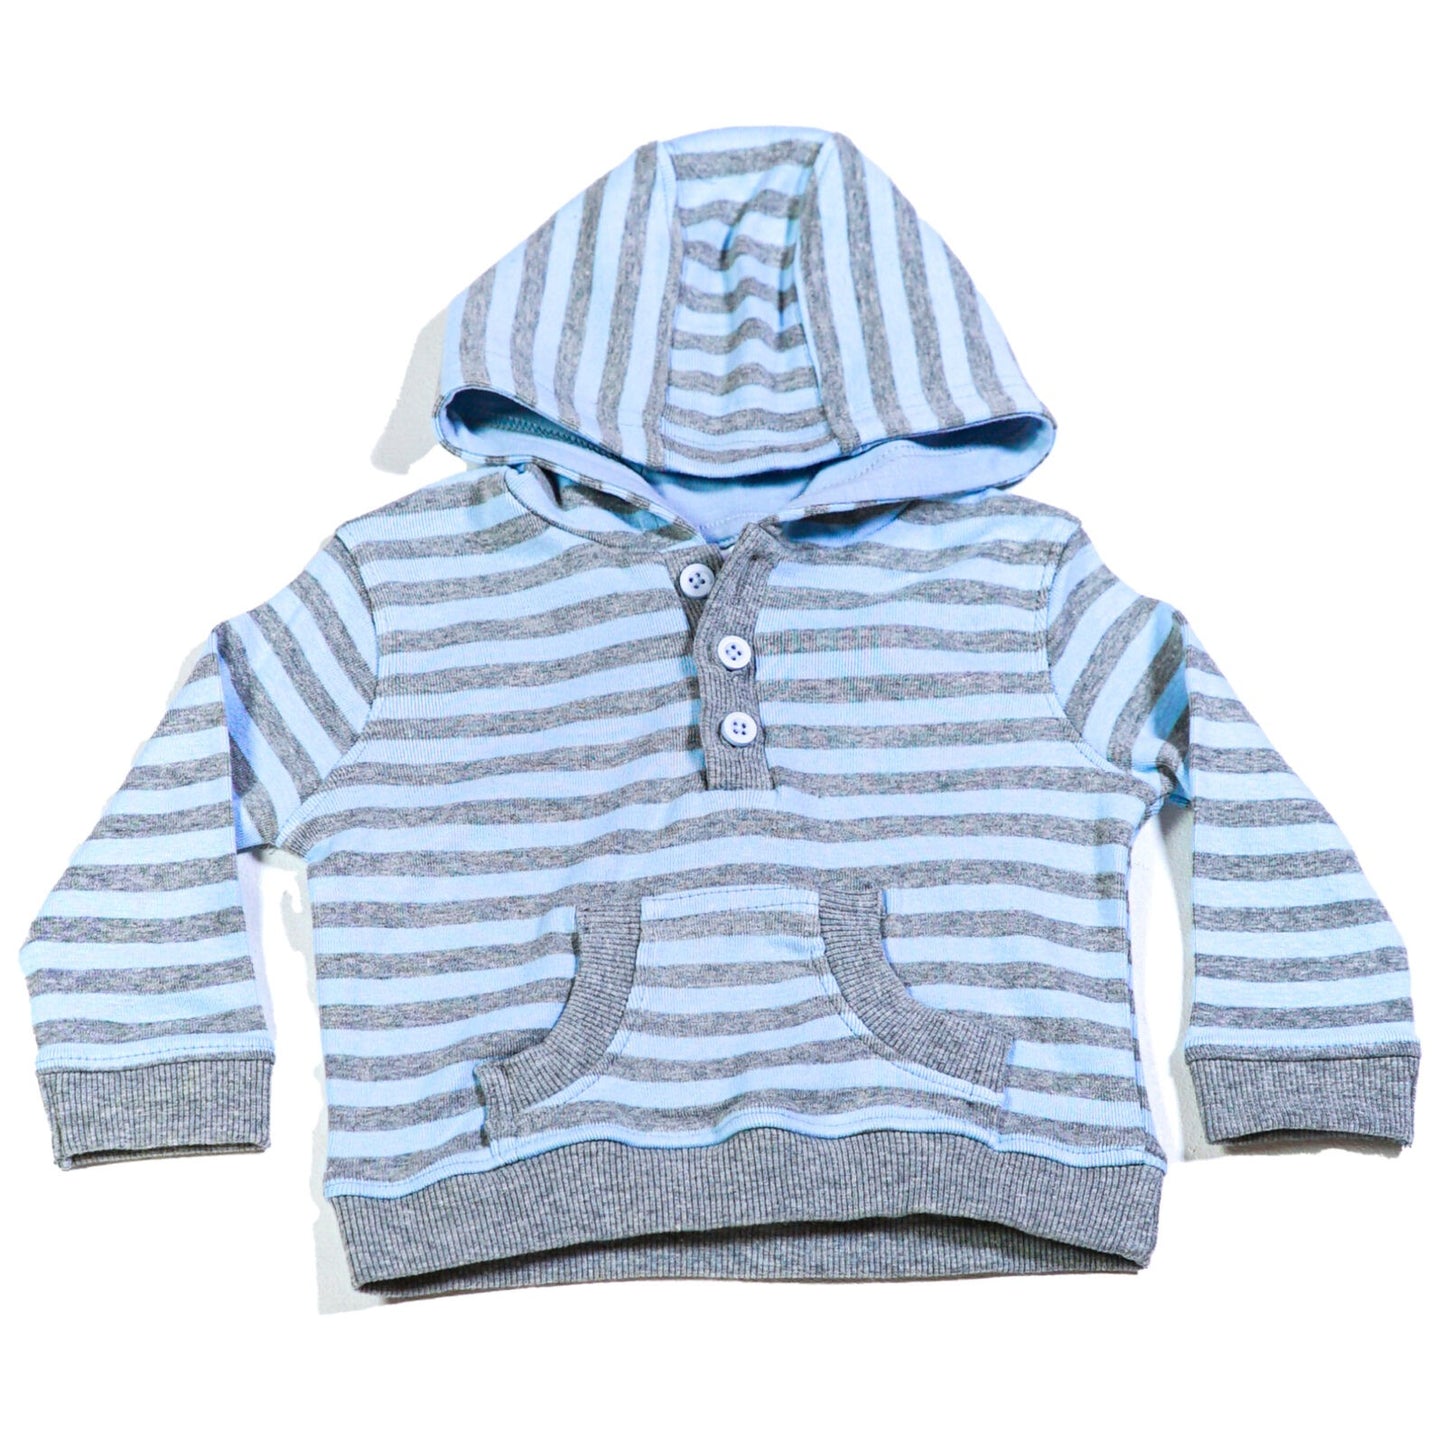 Cotton and polyester striped pull-on hoodie top